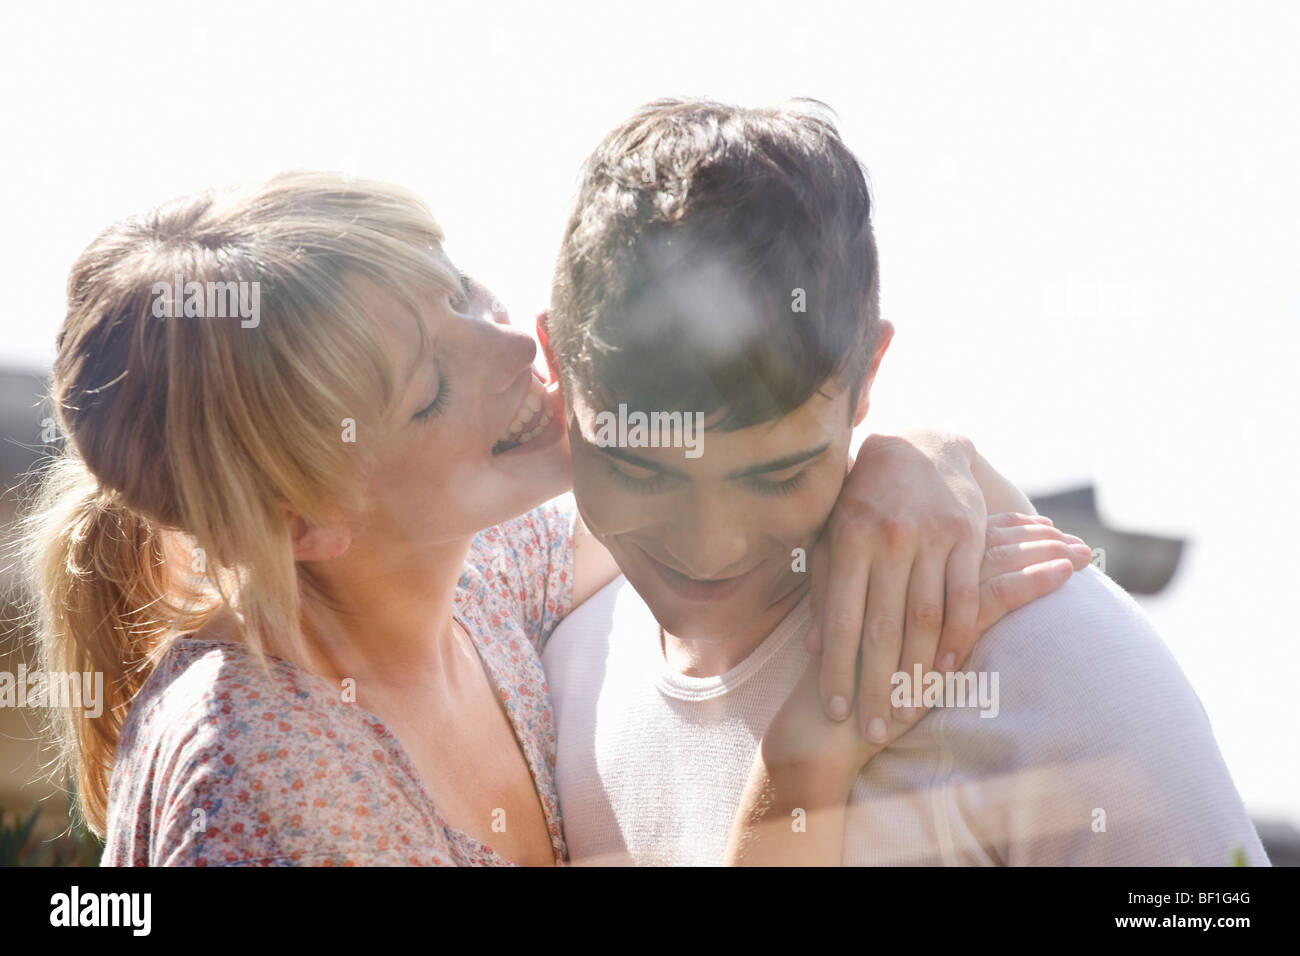 A young woman playfully licking a young man's ear Stock Photo